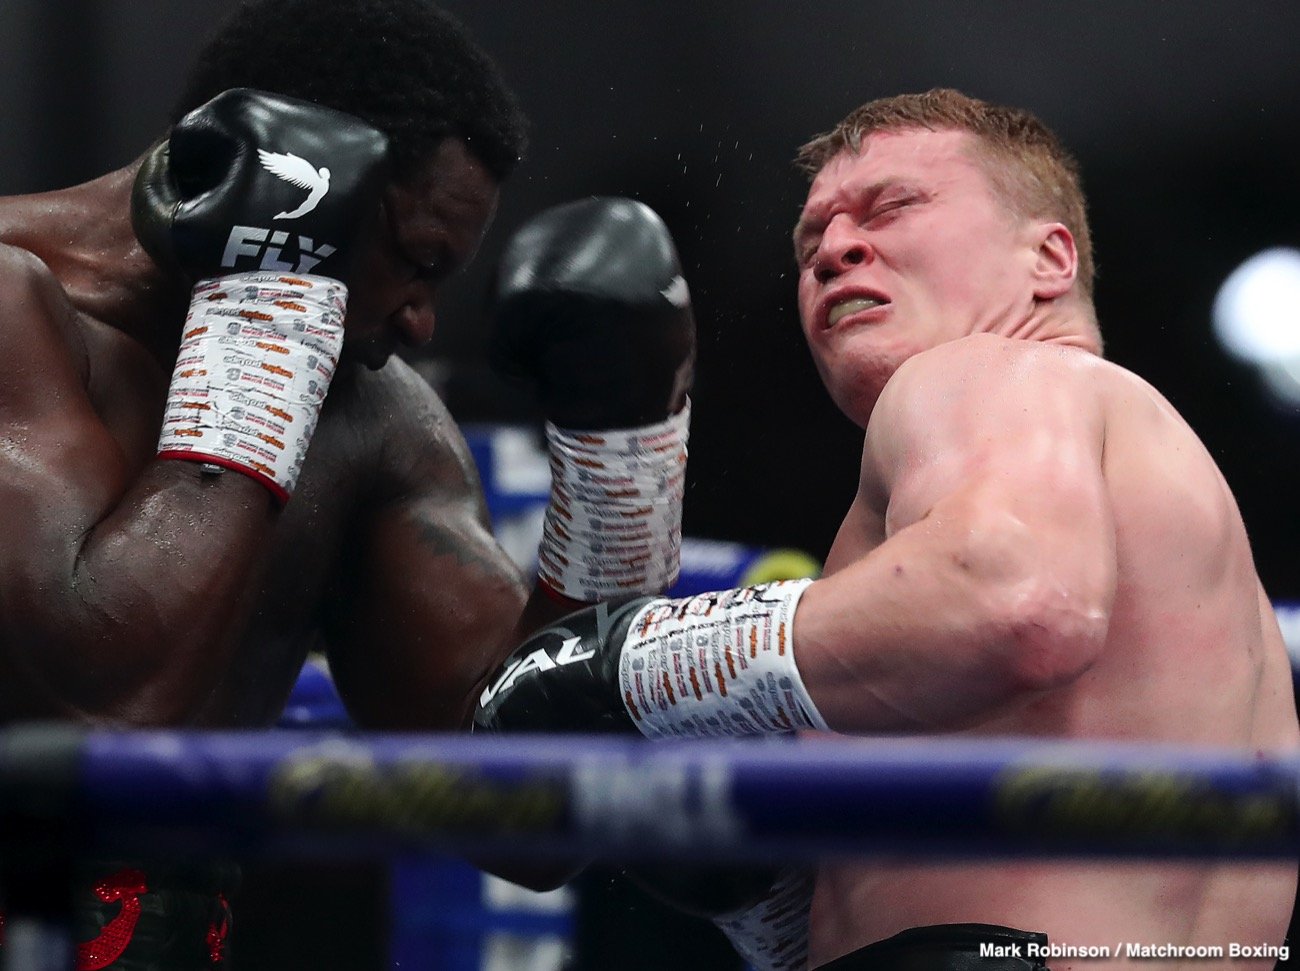 Image: Bob Arum gloats after Dillian Whyte's loss to Alexander Povetkin